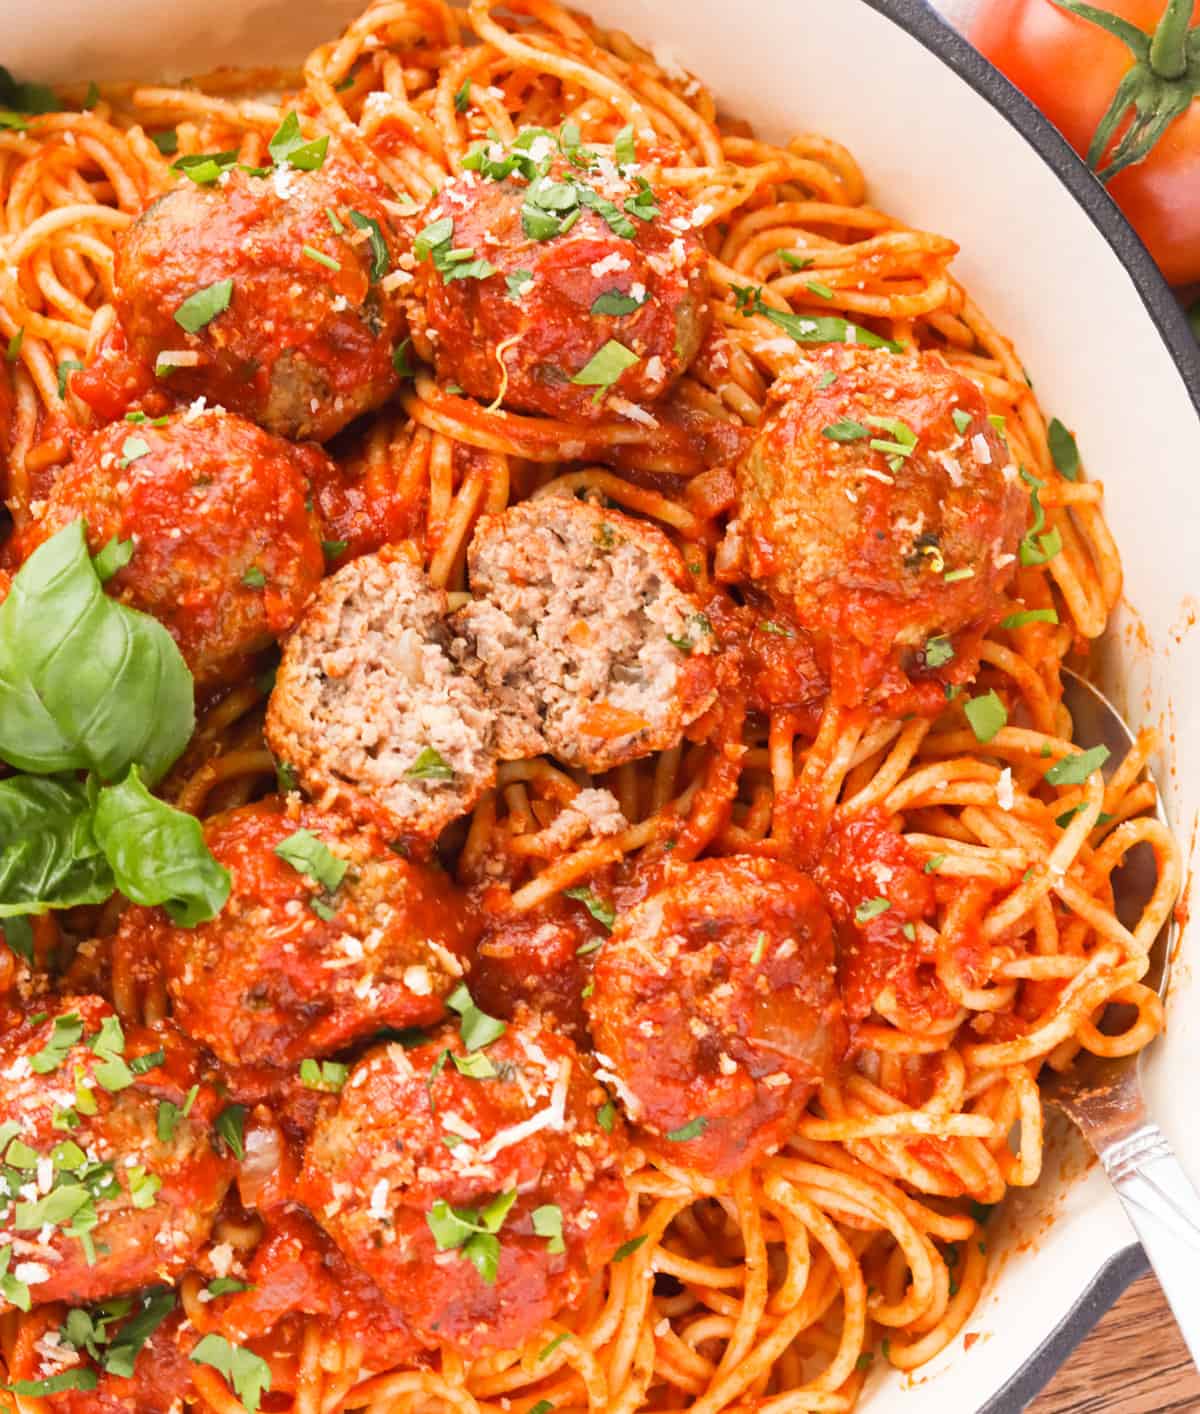 A bowl of spaghetti and meatballs with an inside shot of the meatball